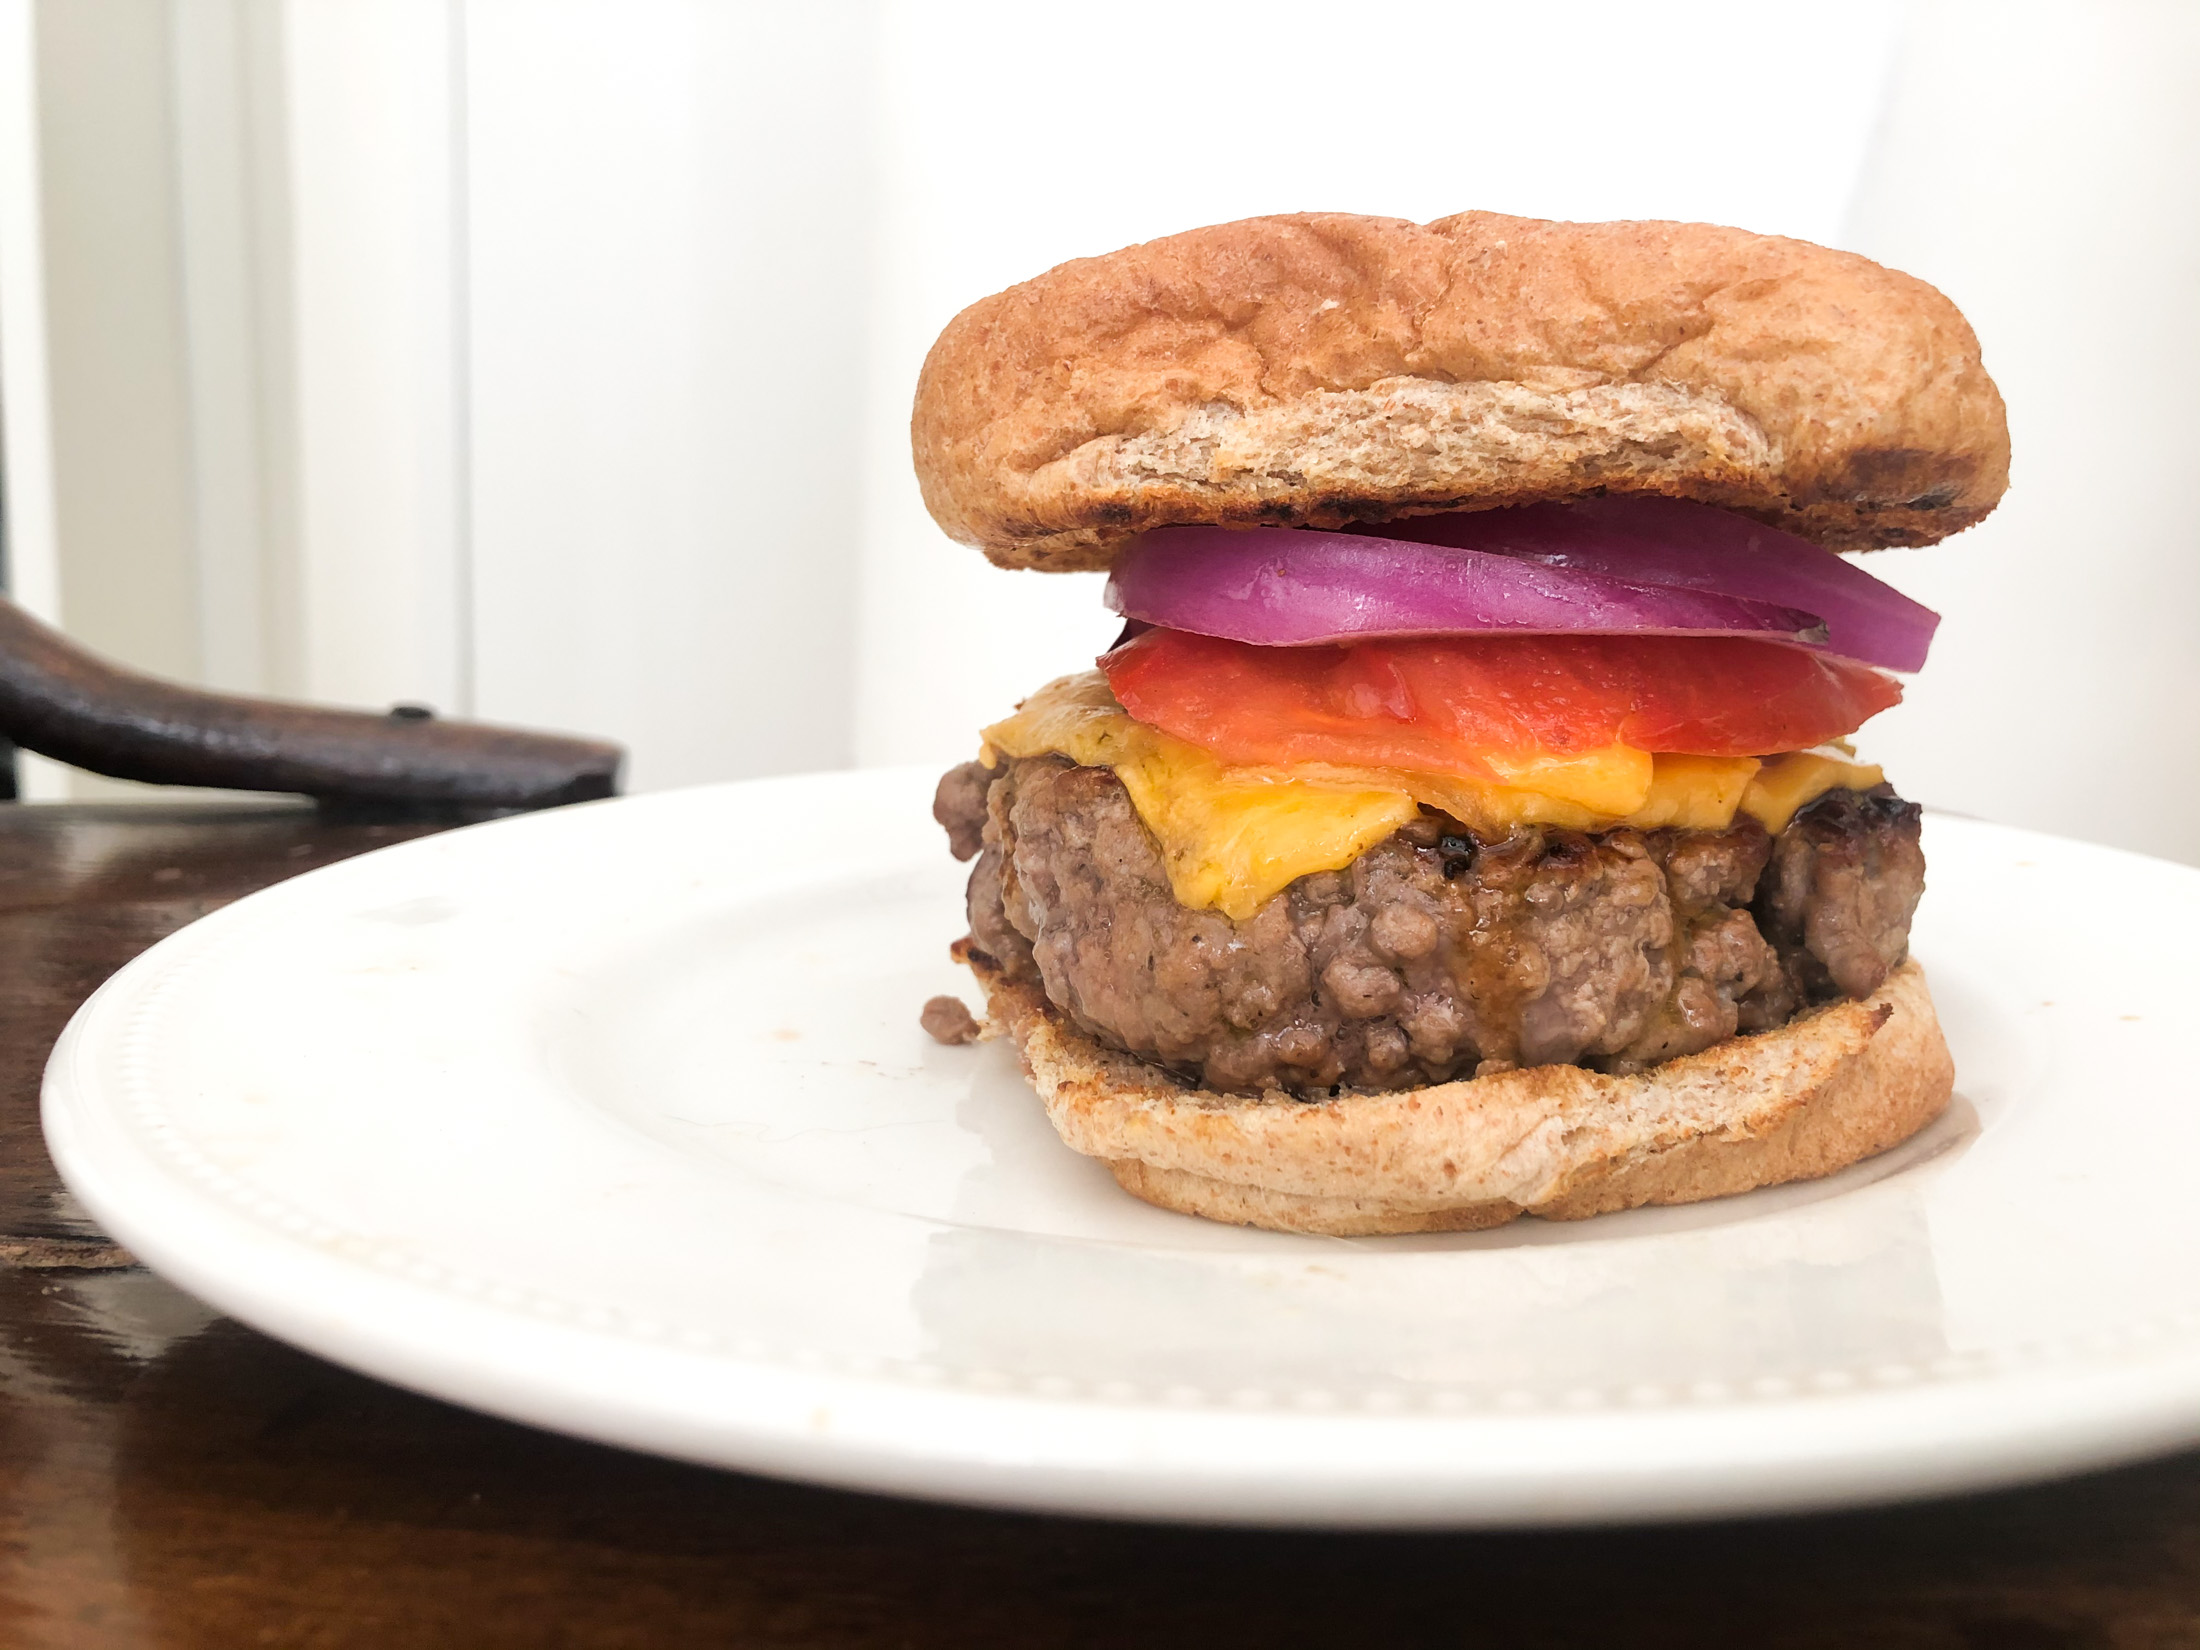 George W. Bush’s Favorite Cheeseburger Ain’t for Purists